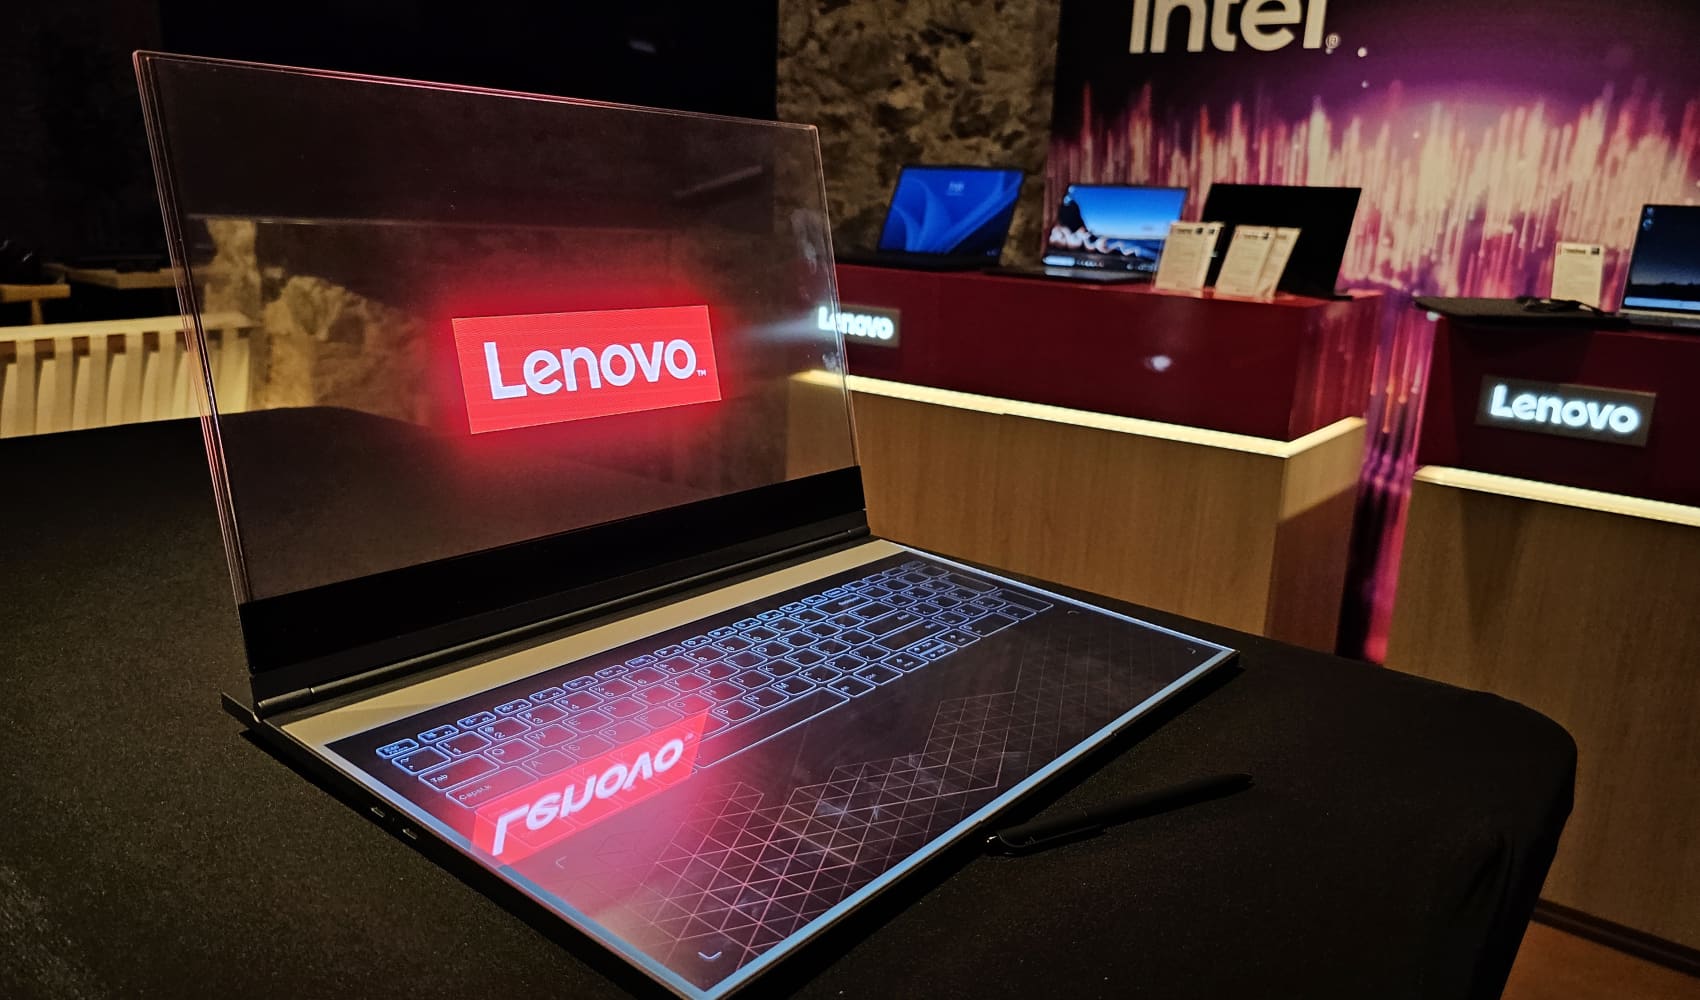 Chinese tech firm Lenovo shows off a laptop with a see-through screen